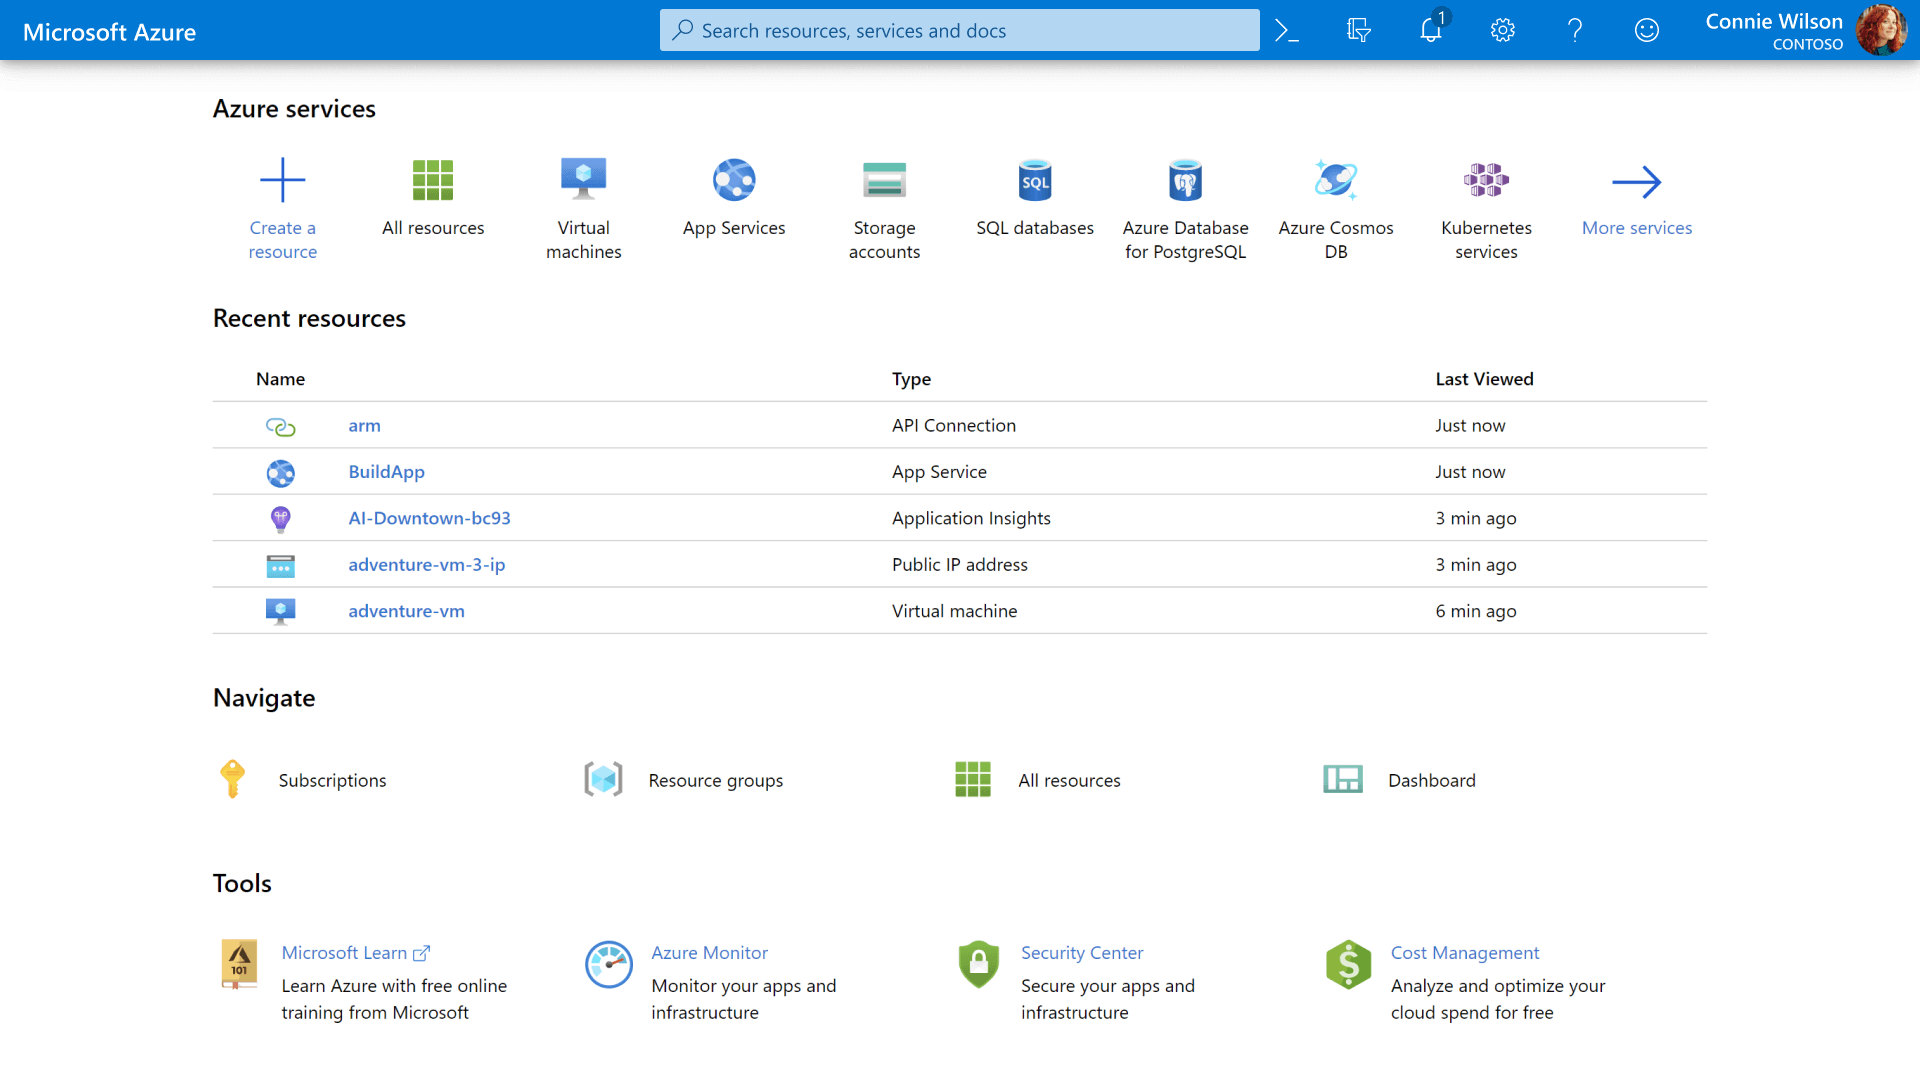 Azure enables you to build and run highly available applications without focusing on the infrastructure. It provides automatic OS and service patching, built in network load balancing and resiliency to hardware failure, and supports a deployment model that enables you to upgrade your applications without downtime.